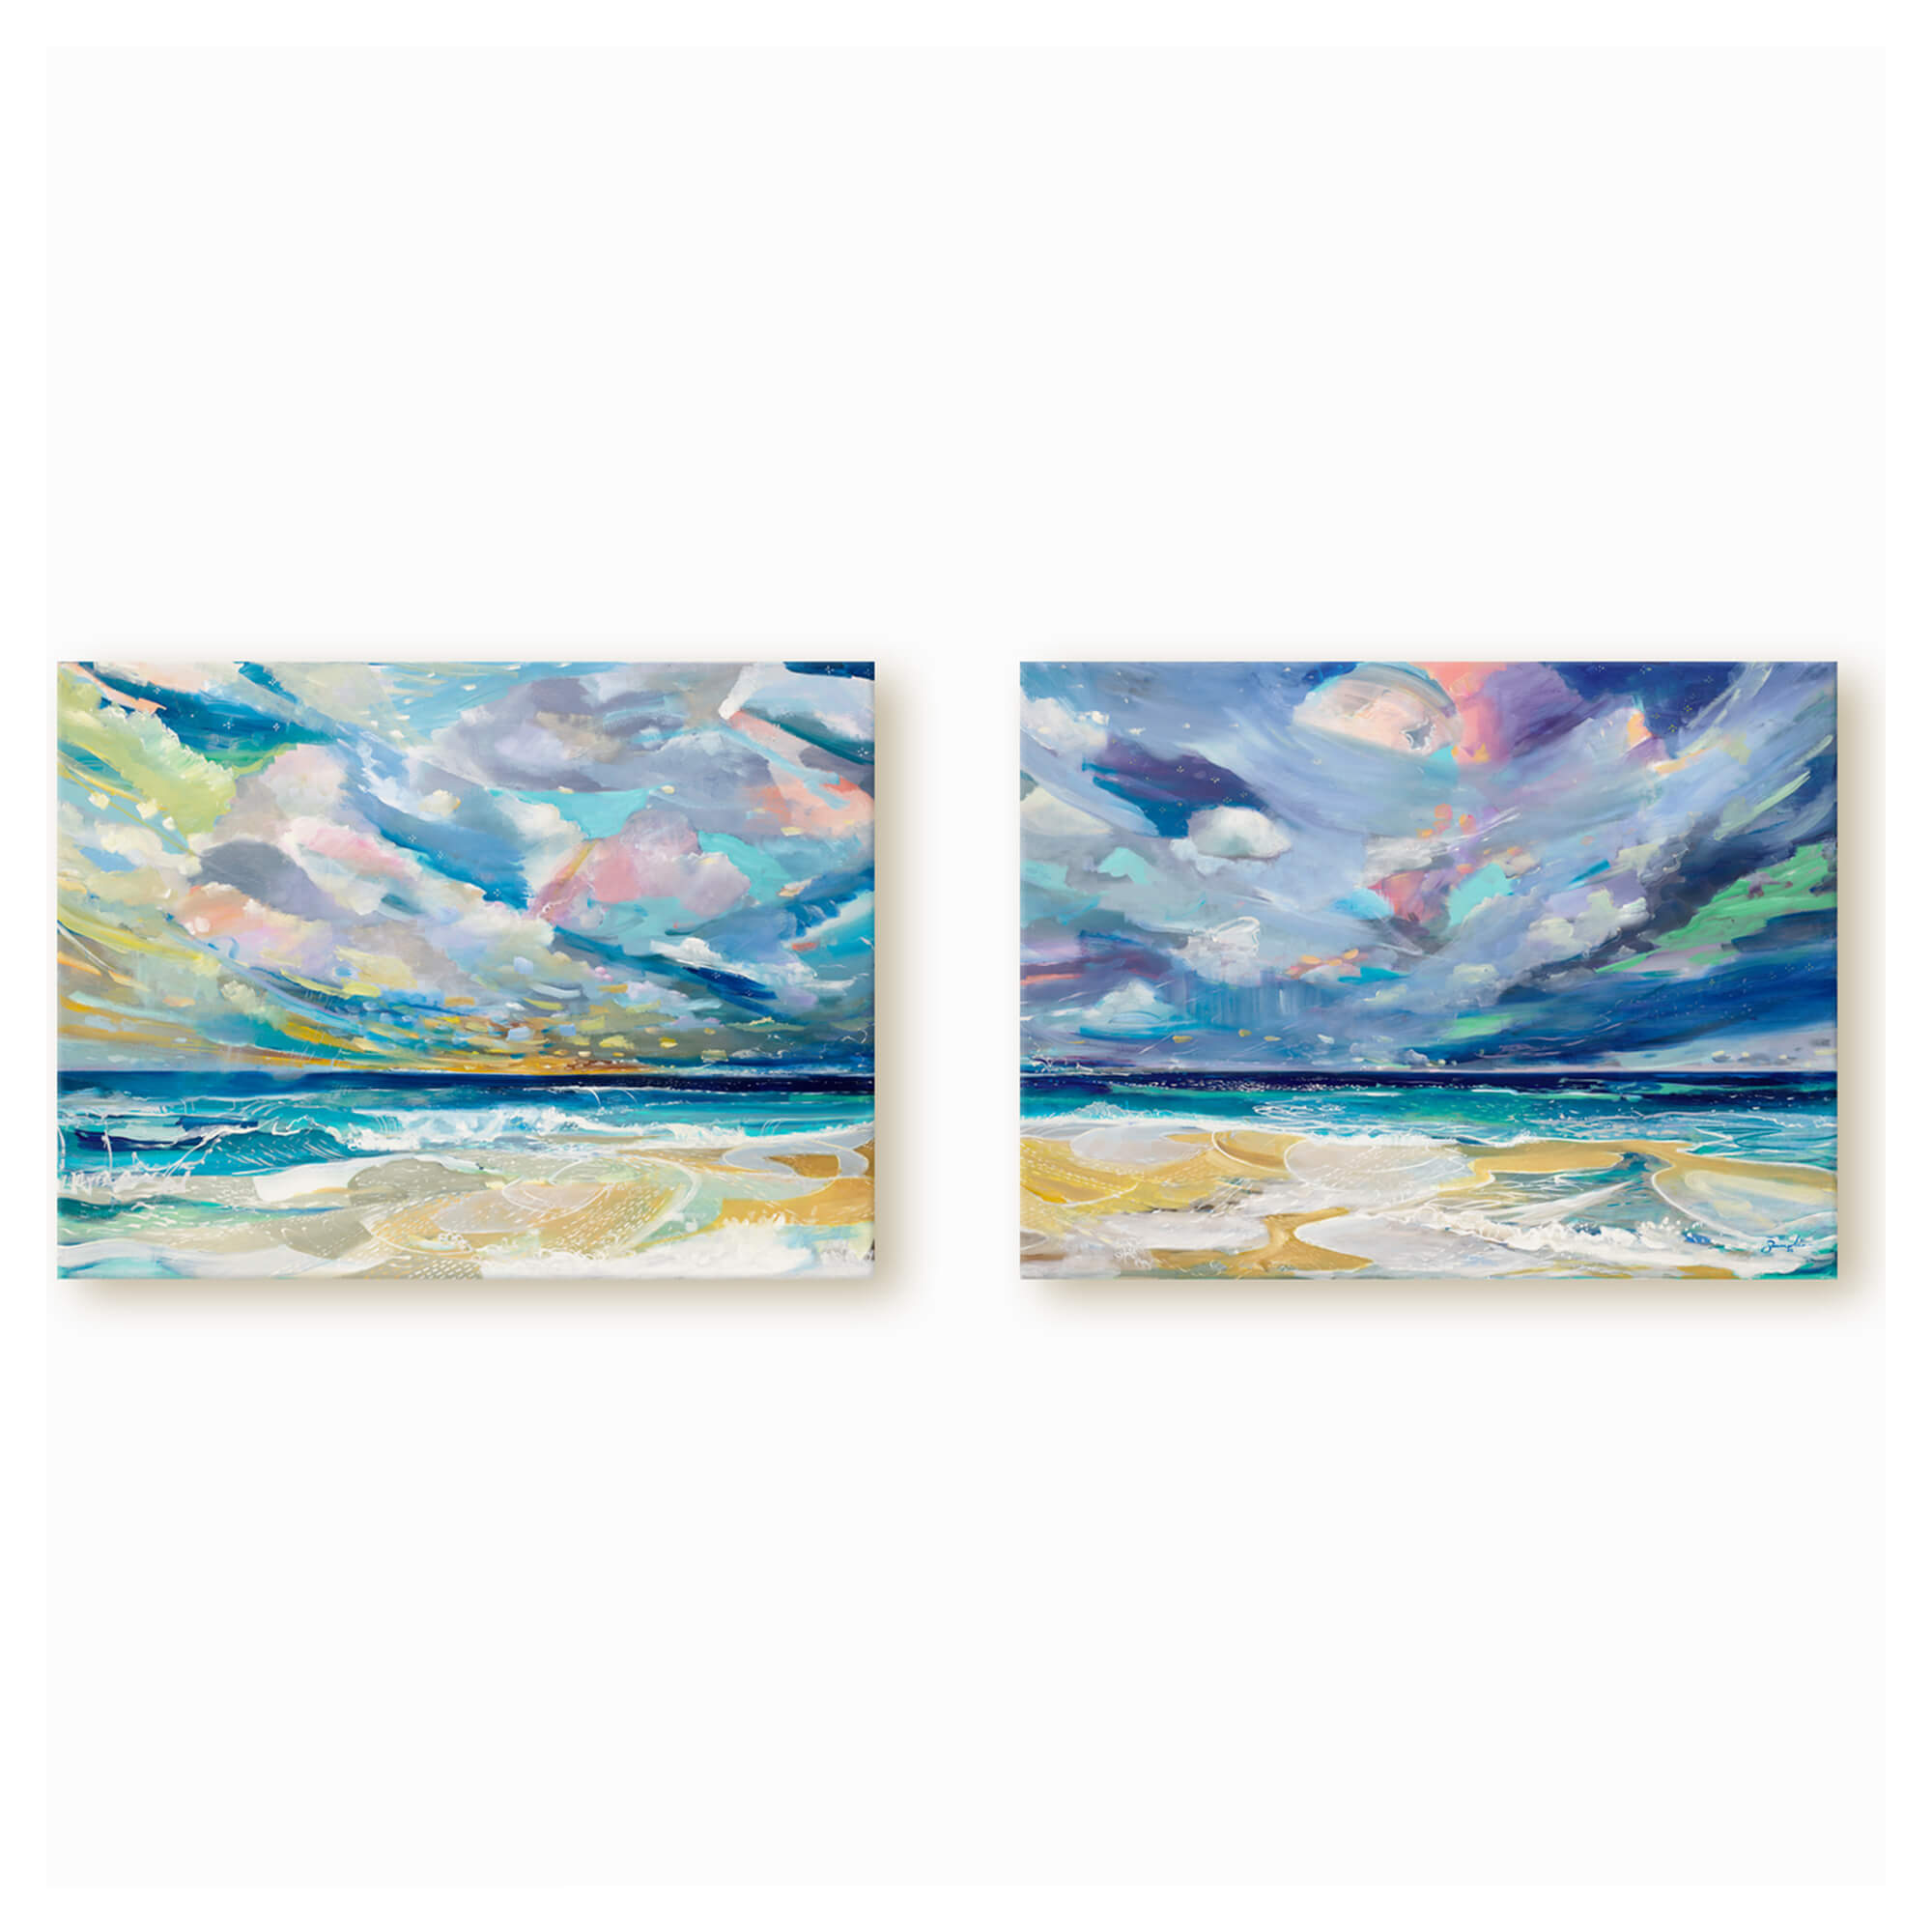 A canvas giclée art print  featuring a colorful abstract ocean view by famed Hawaii artist Saumolia Puapuaga